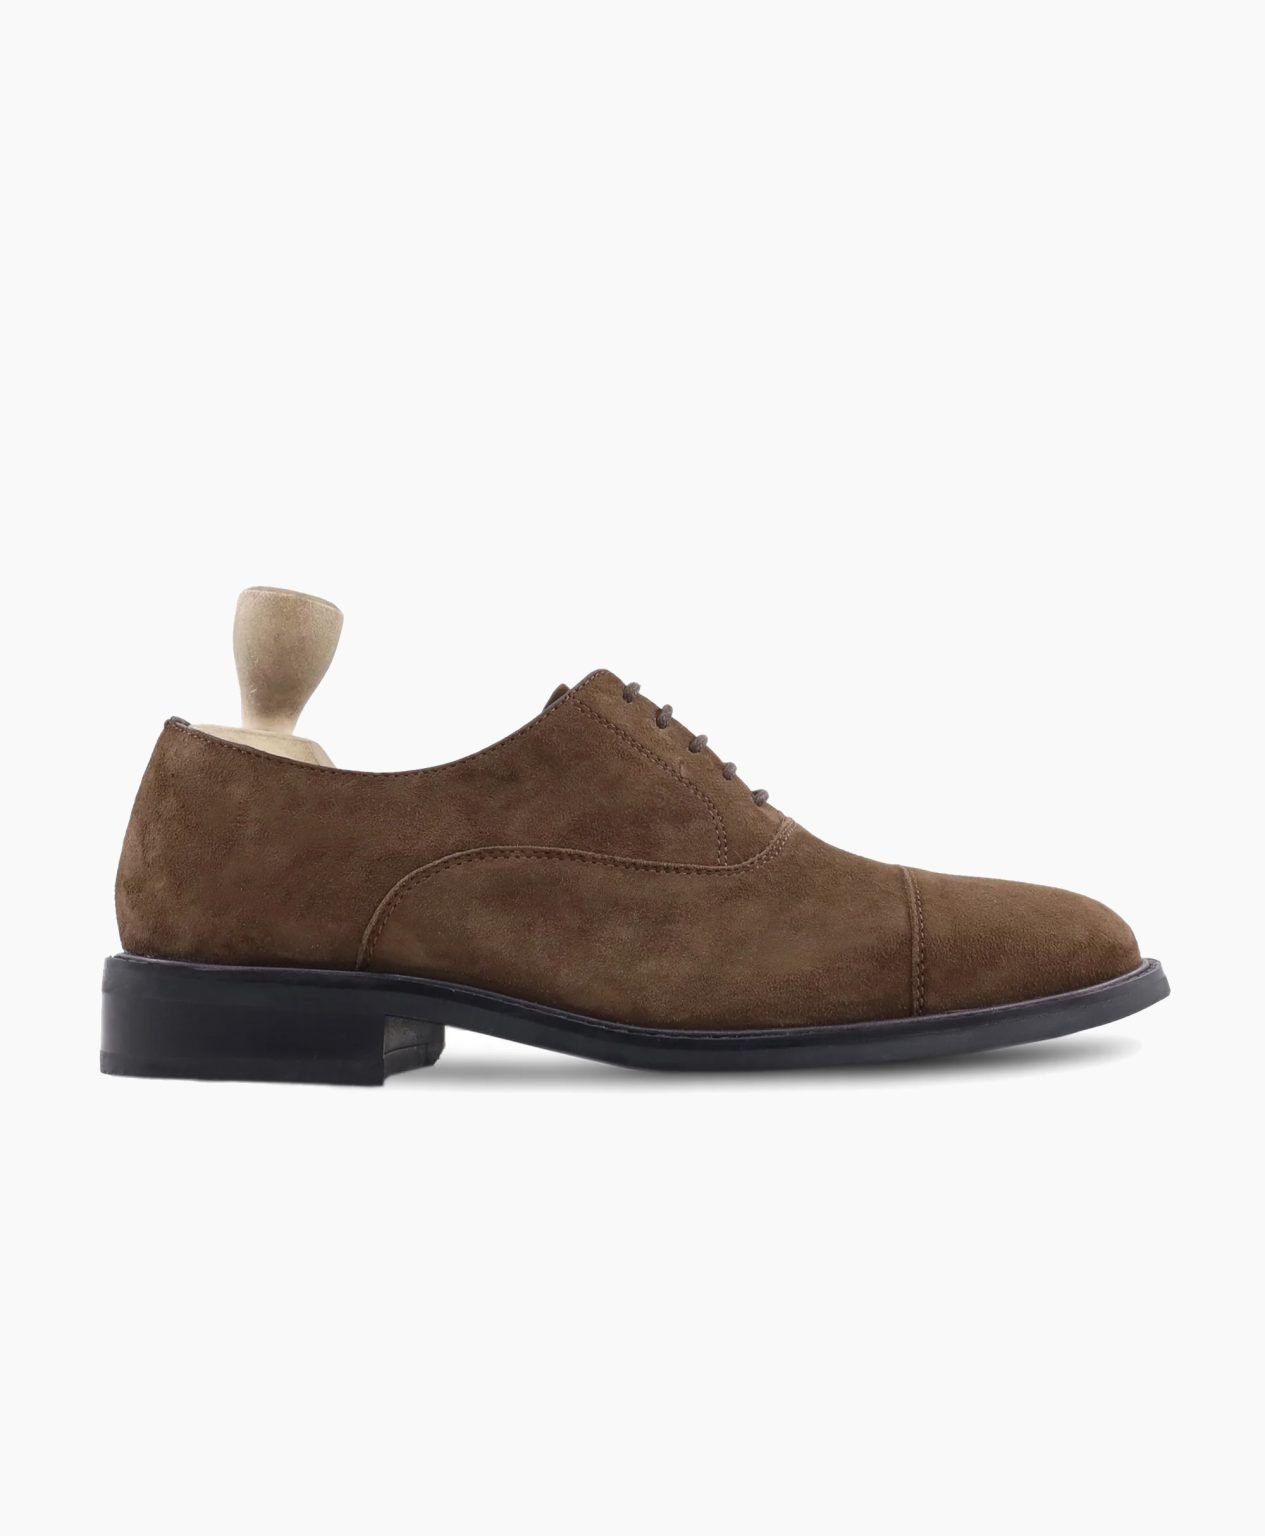 congleton-oxford-dark-brown-suede-leather-shoes-image201